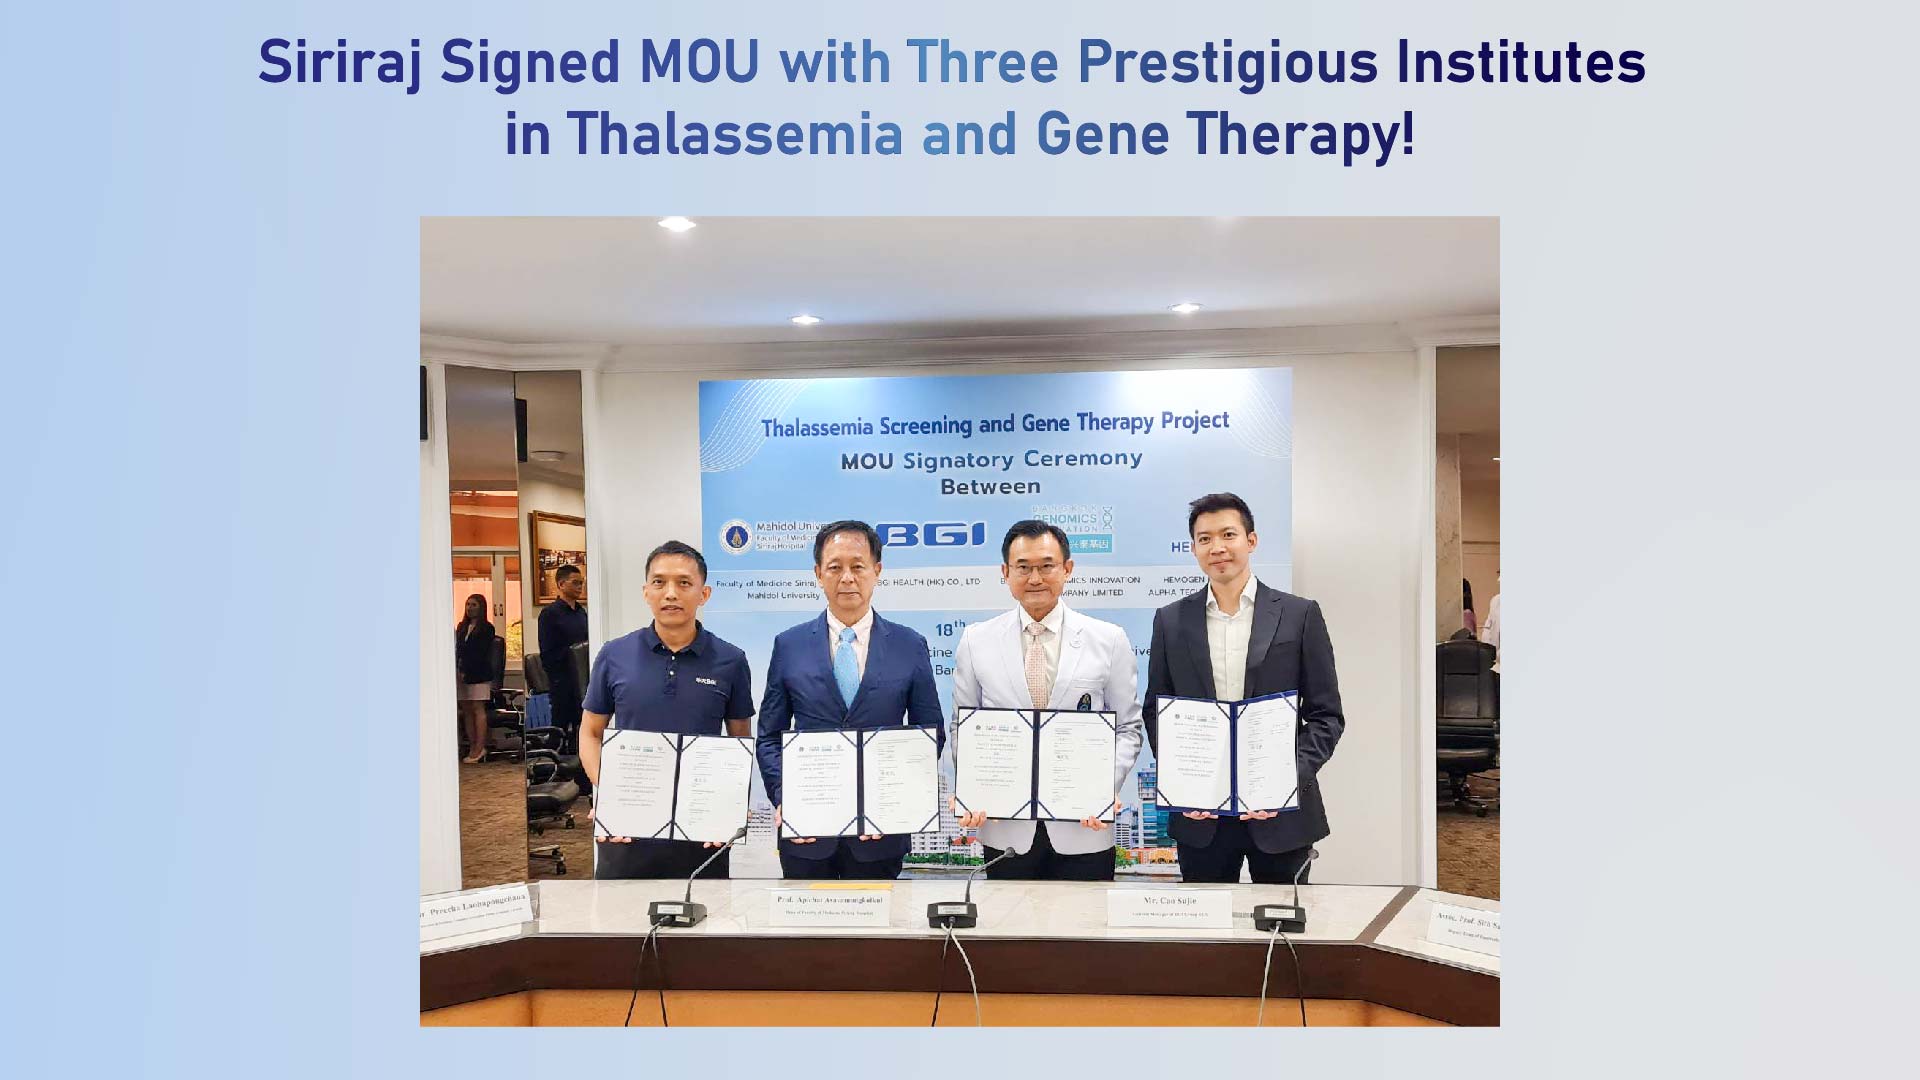 Siriraj Signed MOU with Three Prestigious Institutes in Thalassemia and Gene Therapy